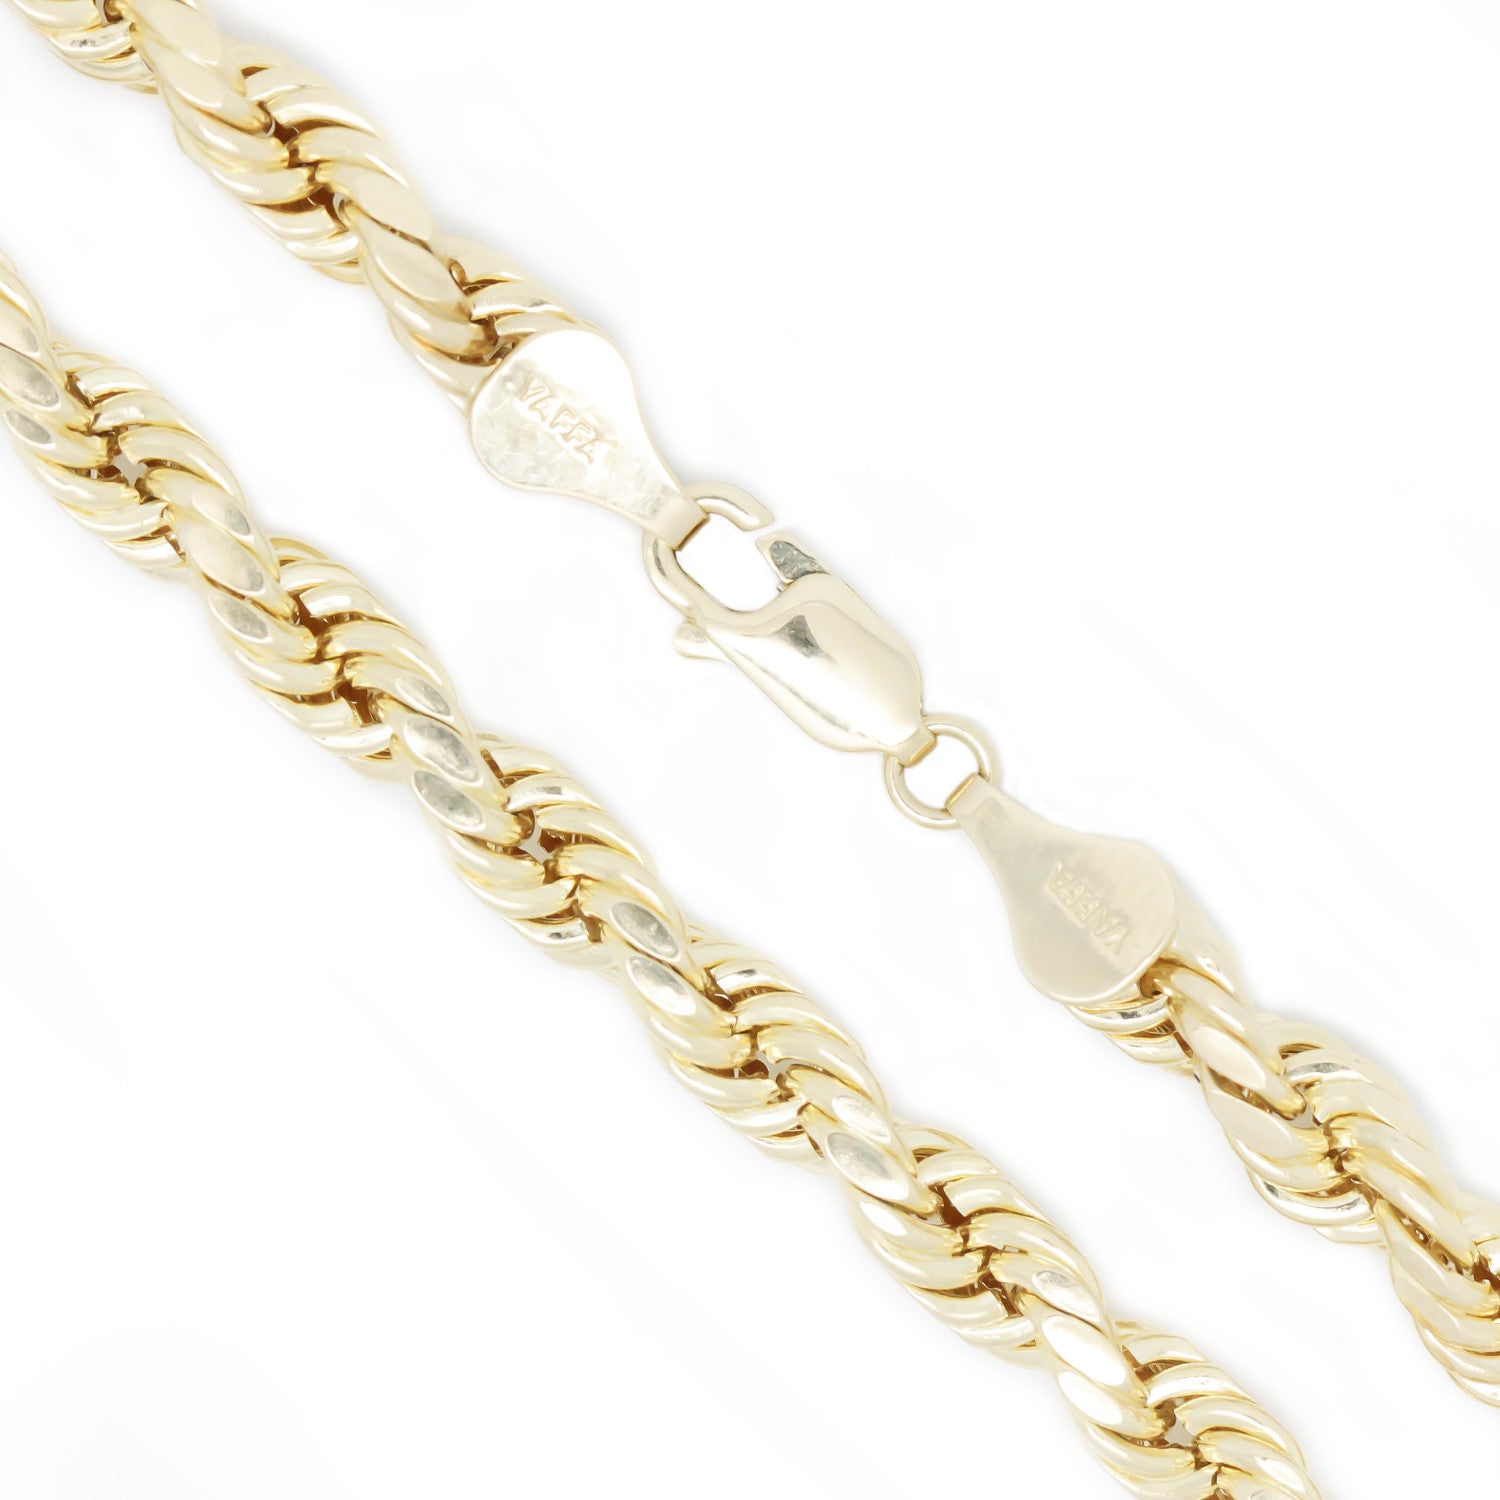 10K Yellow Gold 2.4 mm Rope Chain Necklace 24 Inches